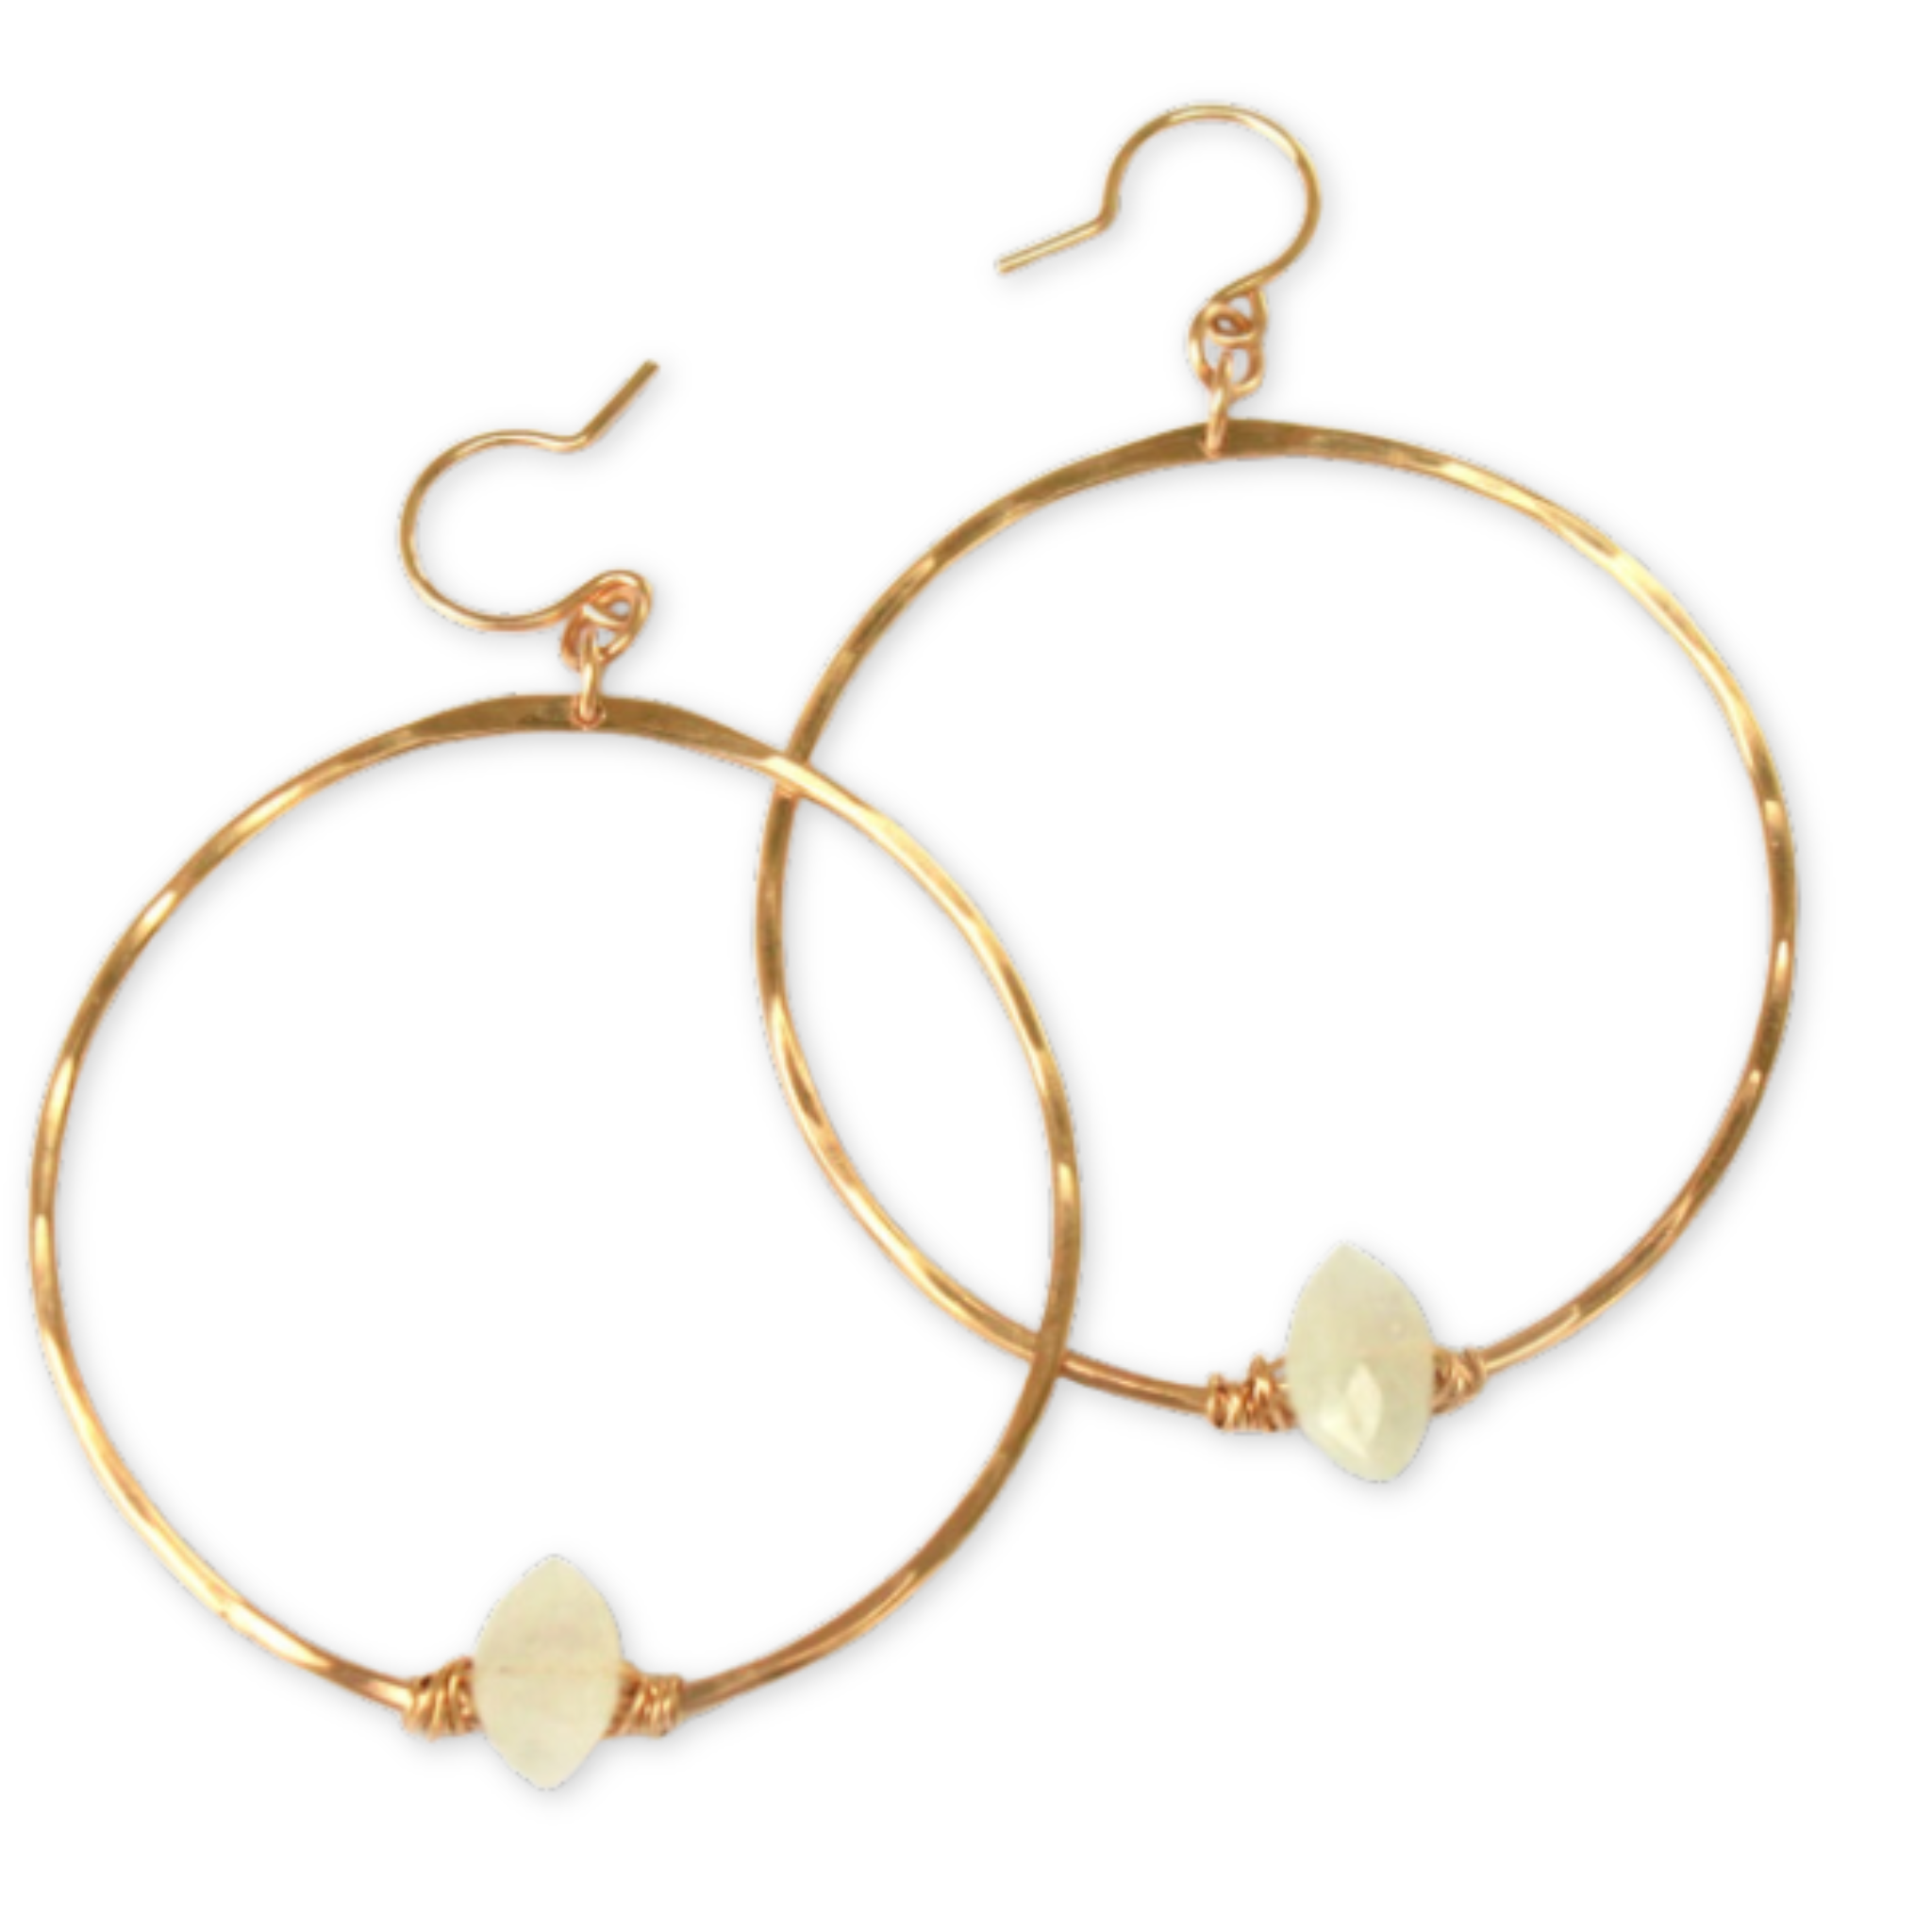 hammered lightweight hoop earrings hanging from ear wire and decorated with a wired on moonstone